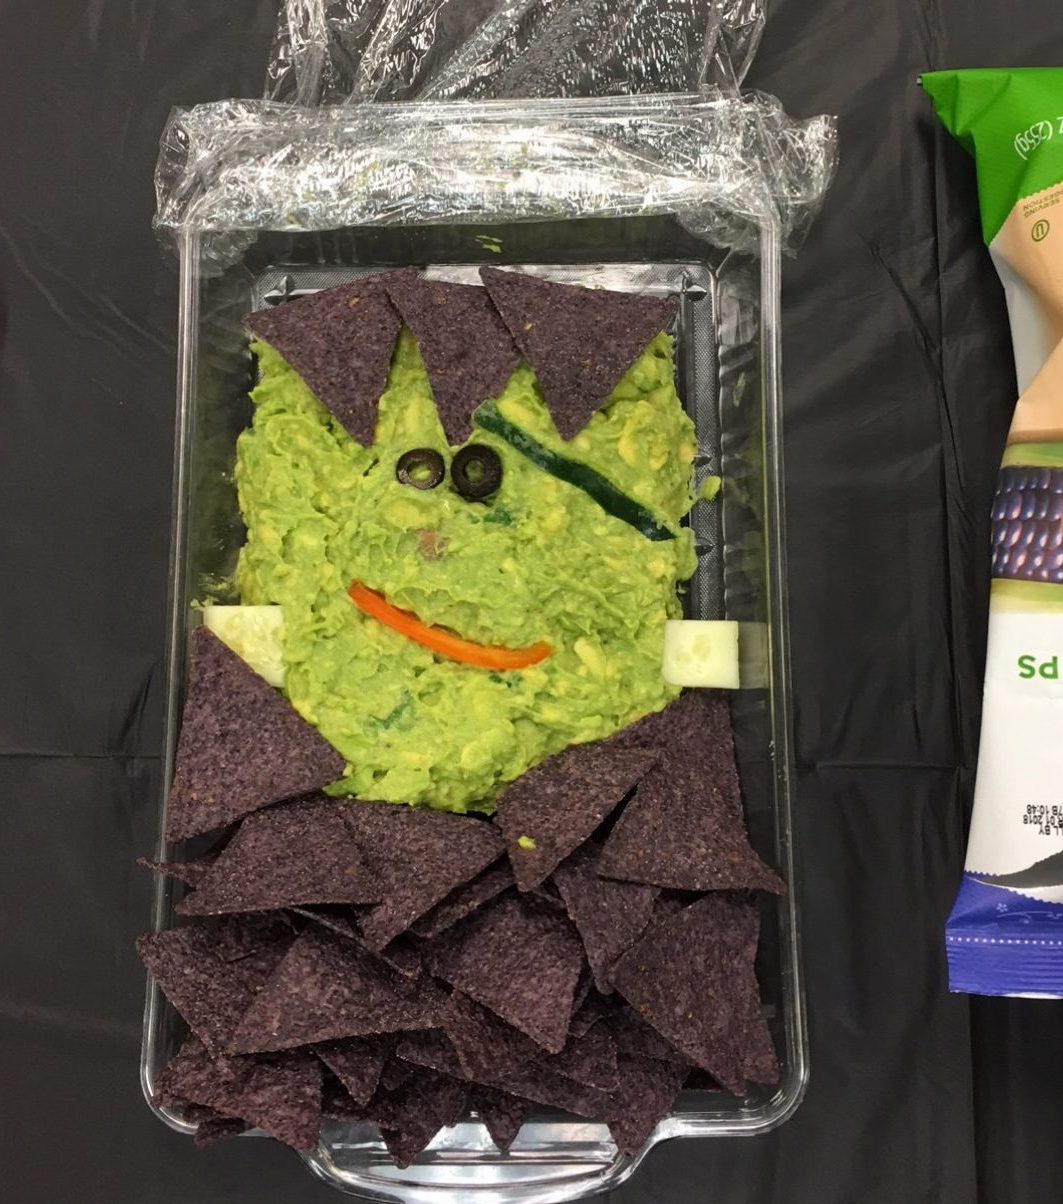 Halloween-inspired chip and guacamole dish